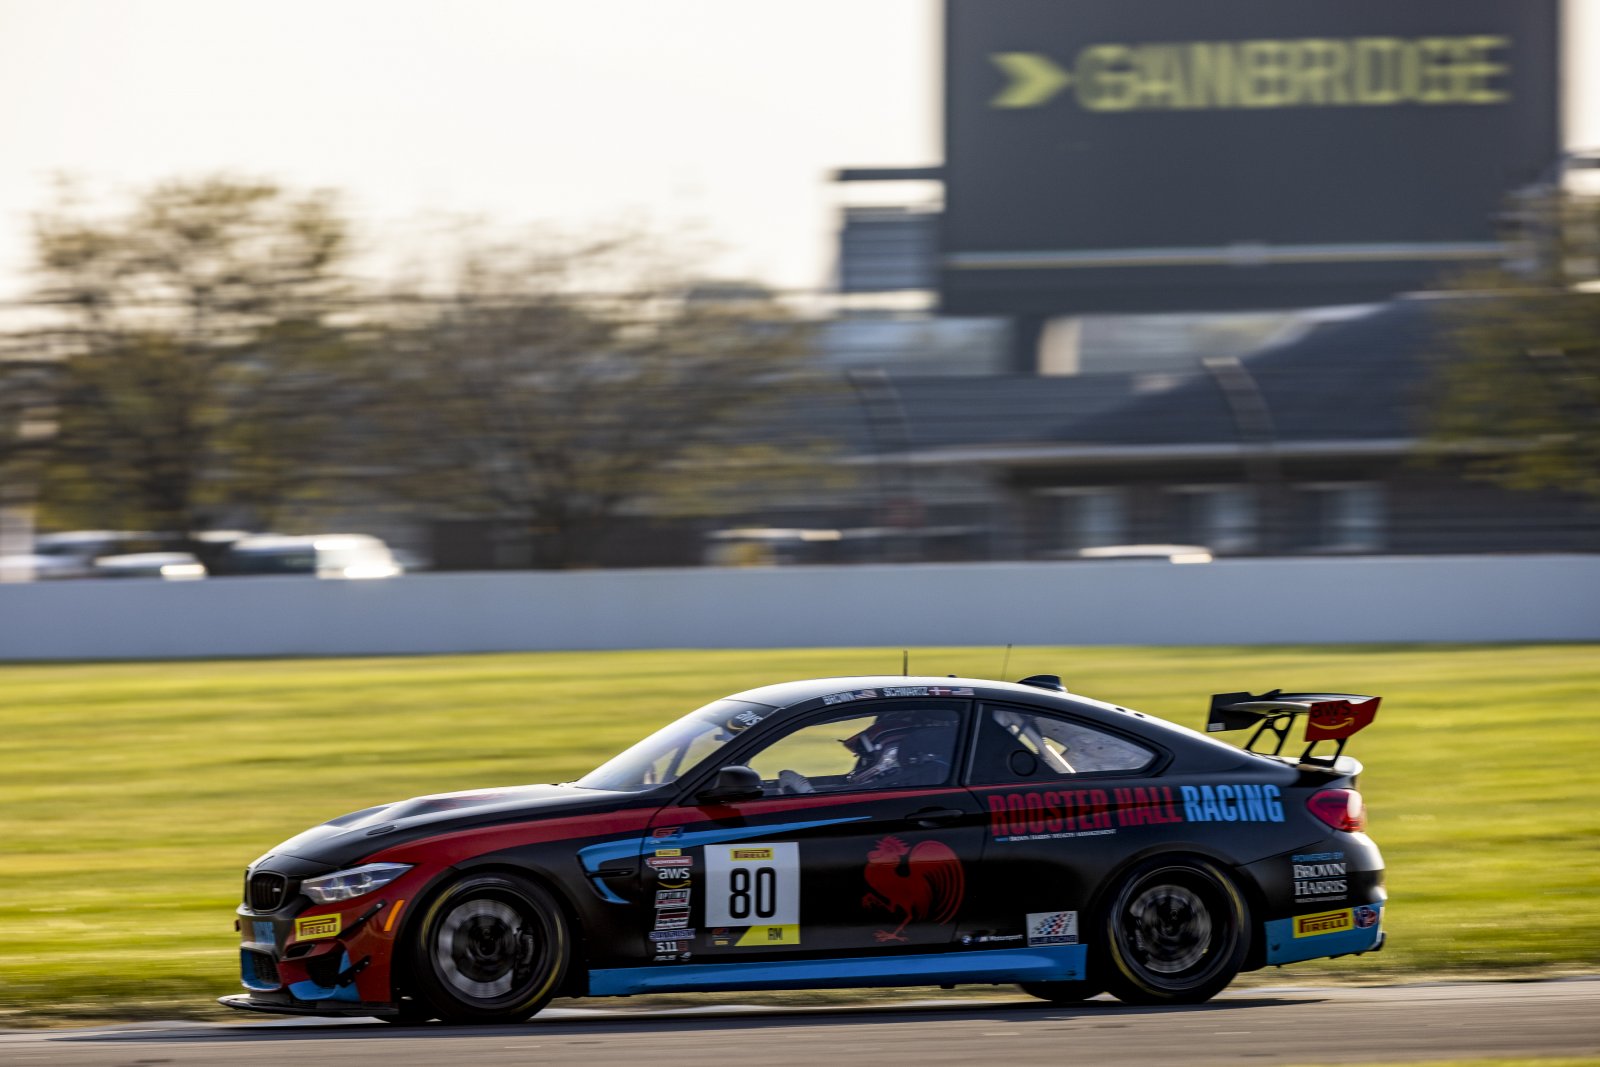 #80 BMW M4 GT4 of Todd Brown and Johan Schwartz, Rooster Hall Racing, GT4 America, Am, SRO America, Indianapolis Motor Speedway, Indianapolis, Indiana, Oct 2022.
 | Regis Lefebure/SRO